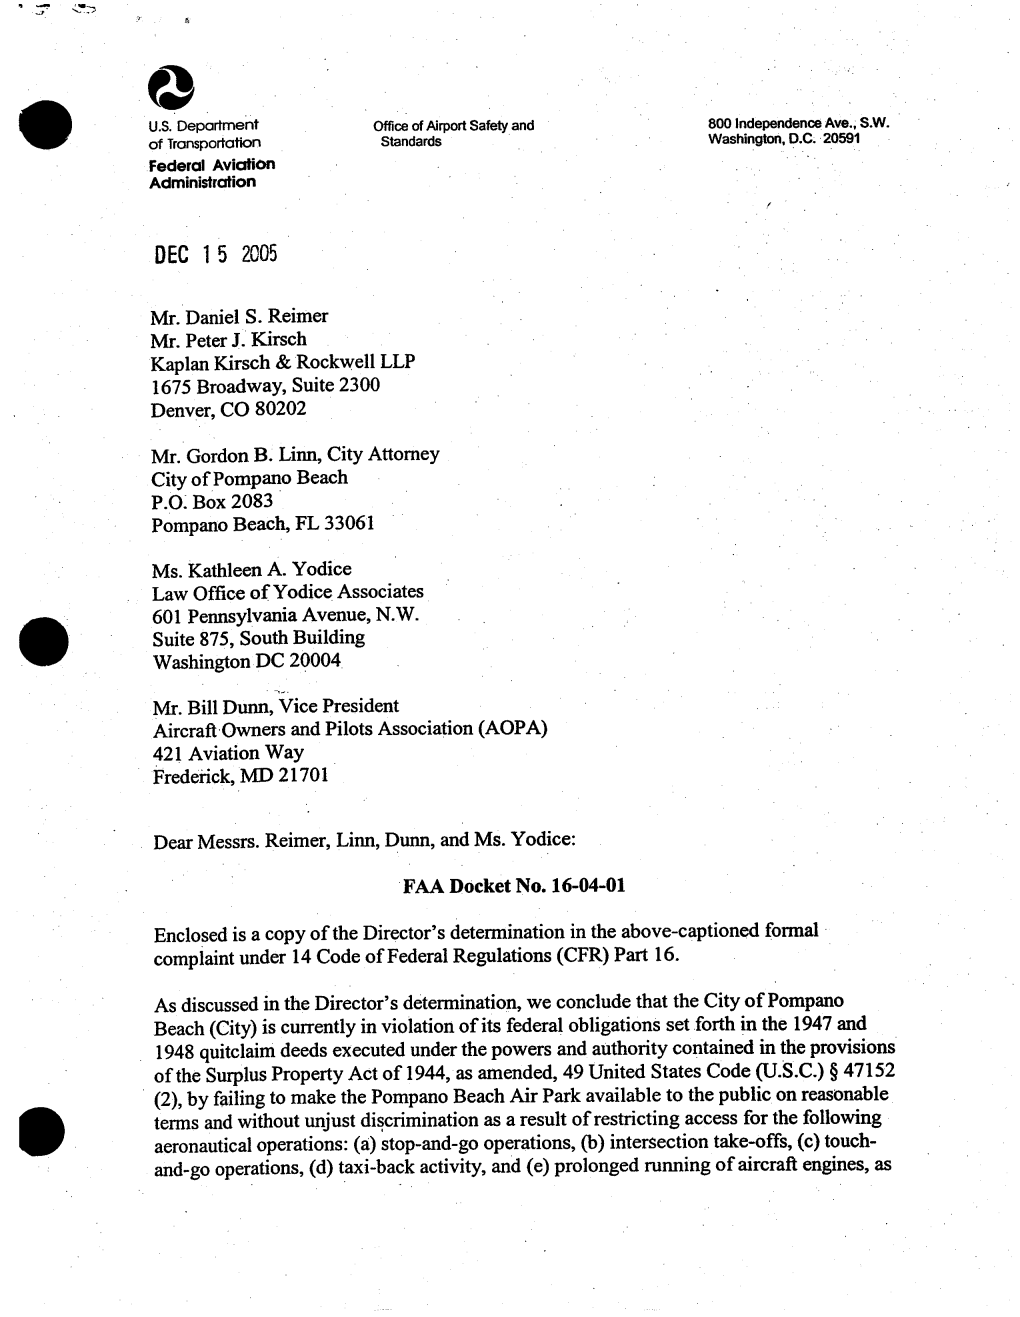 Aircraft Owners & Pilots Ass'n Members V. City of Pompano Beach, Fla., No. 16-04-01, Director's Determination (Dec